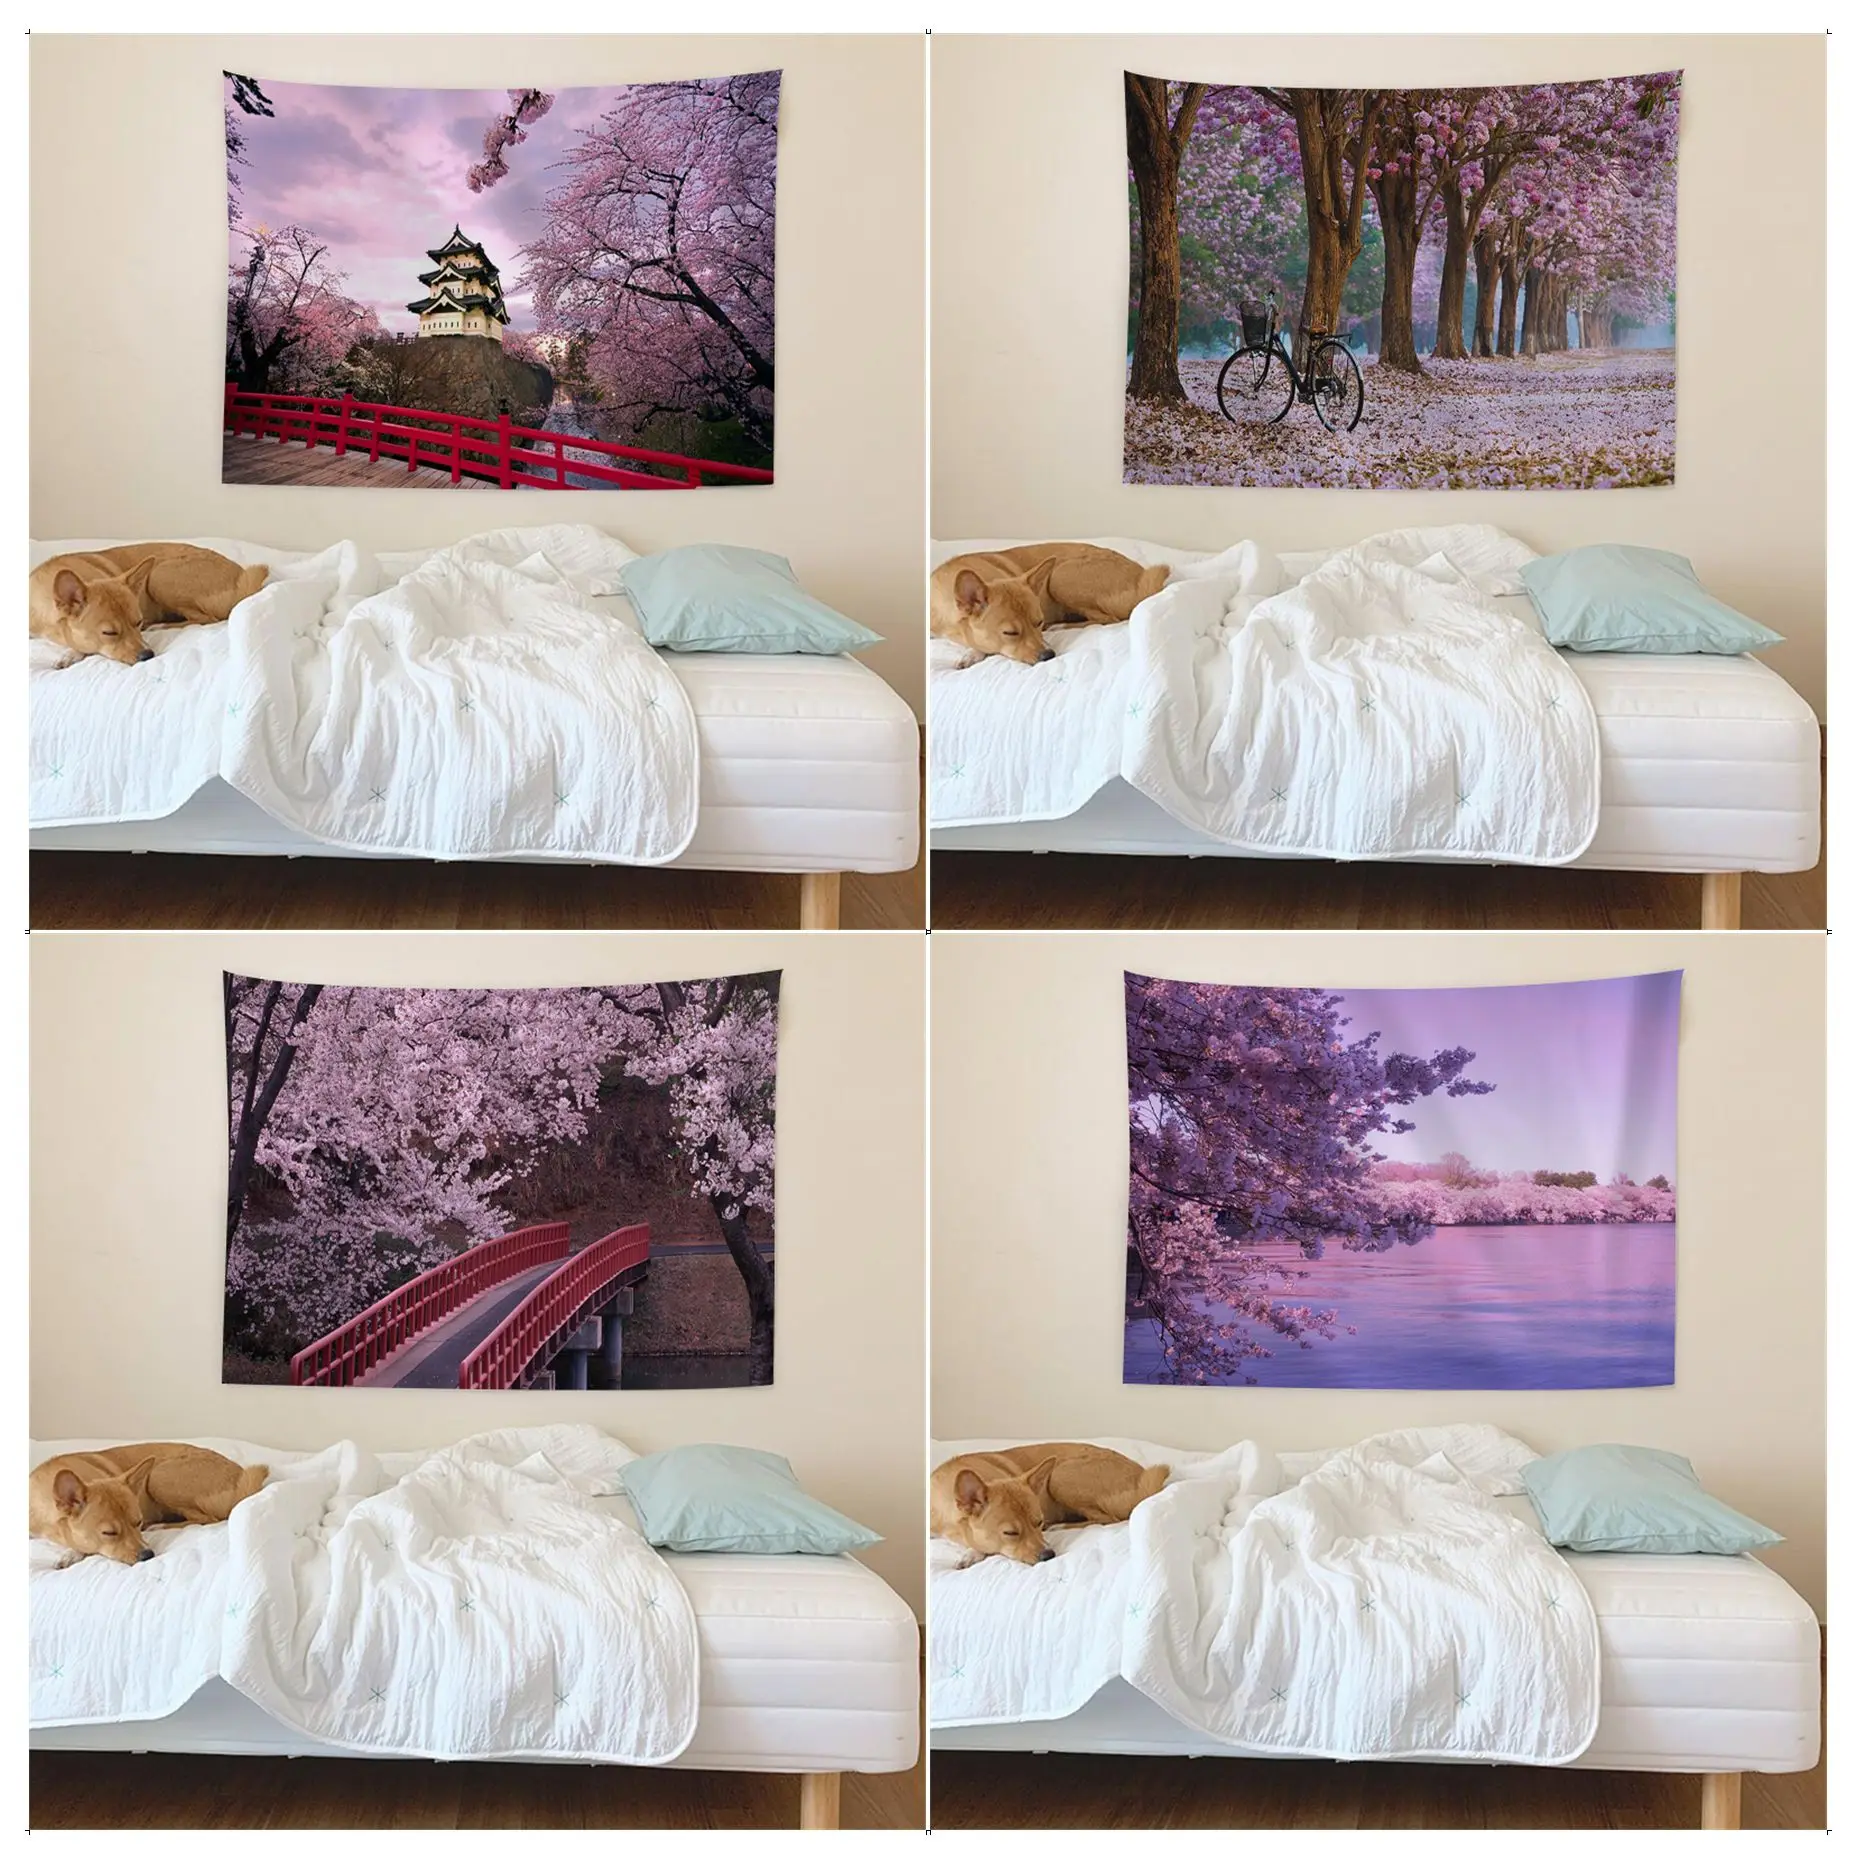 

Cherry Blossom Wall Tapestry Hanging Tarot Hippie Wall Rugs Dorm INS Home Decor